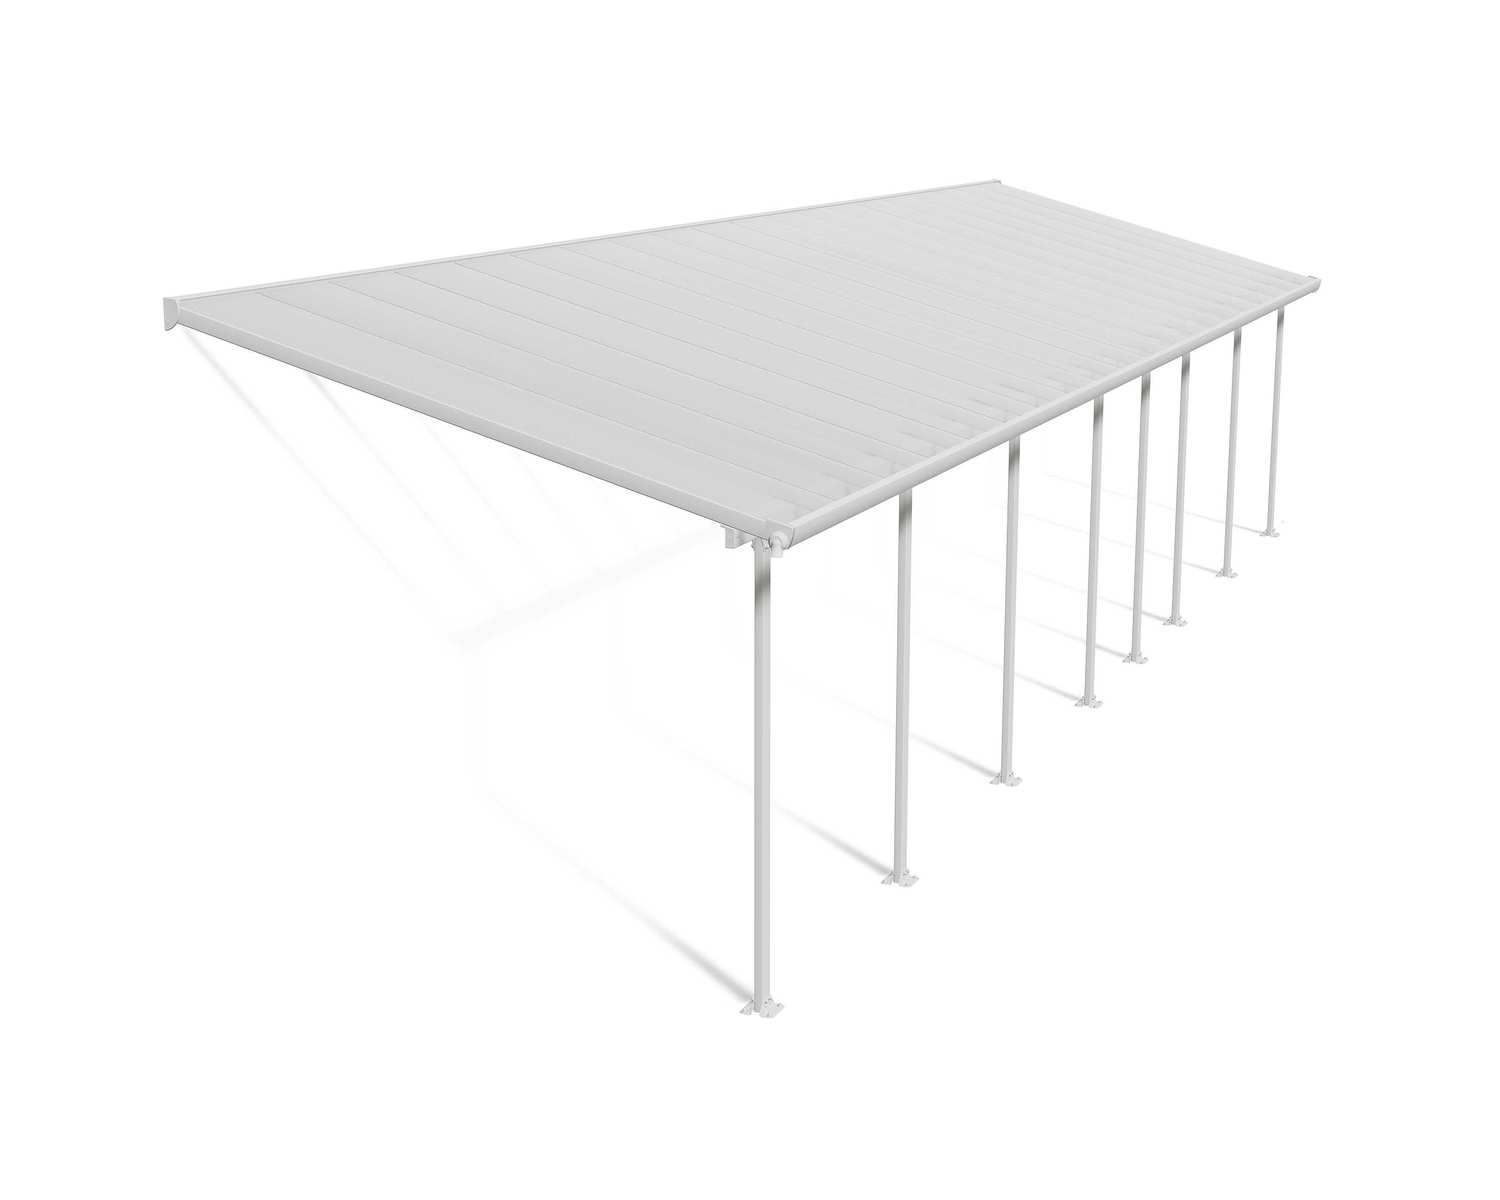 Feria 10 ft. x 40 ft. White Aluminium Patio Cover With 8 Posts, Clear Twin-Wall Polycarbonate Roof Panels.